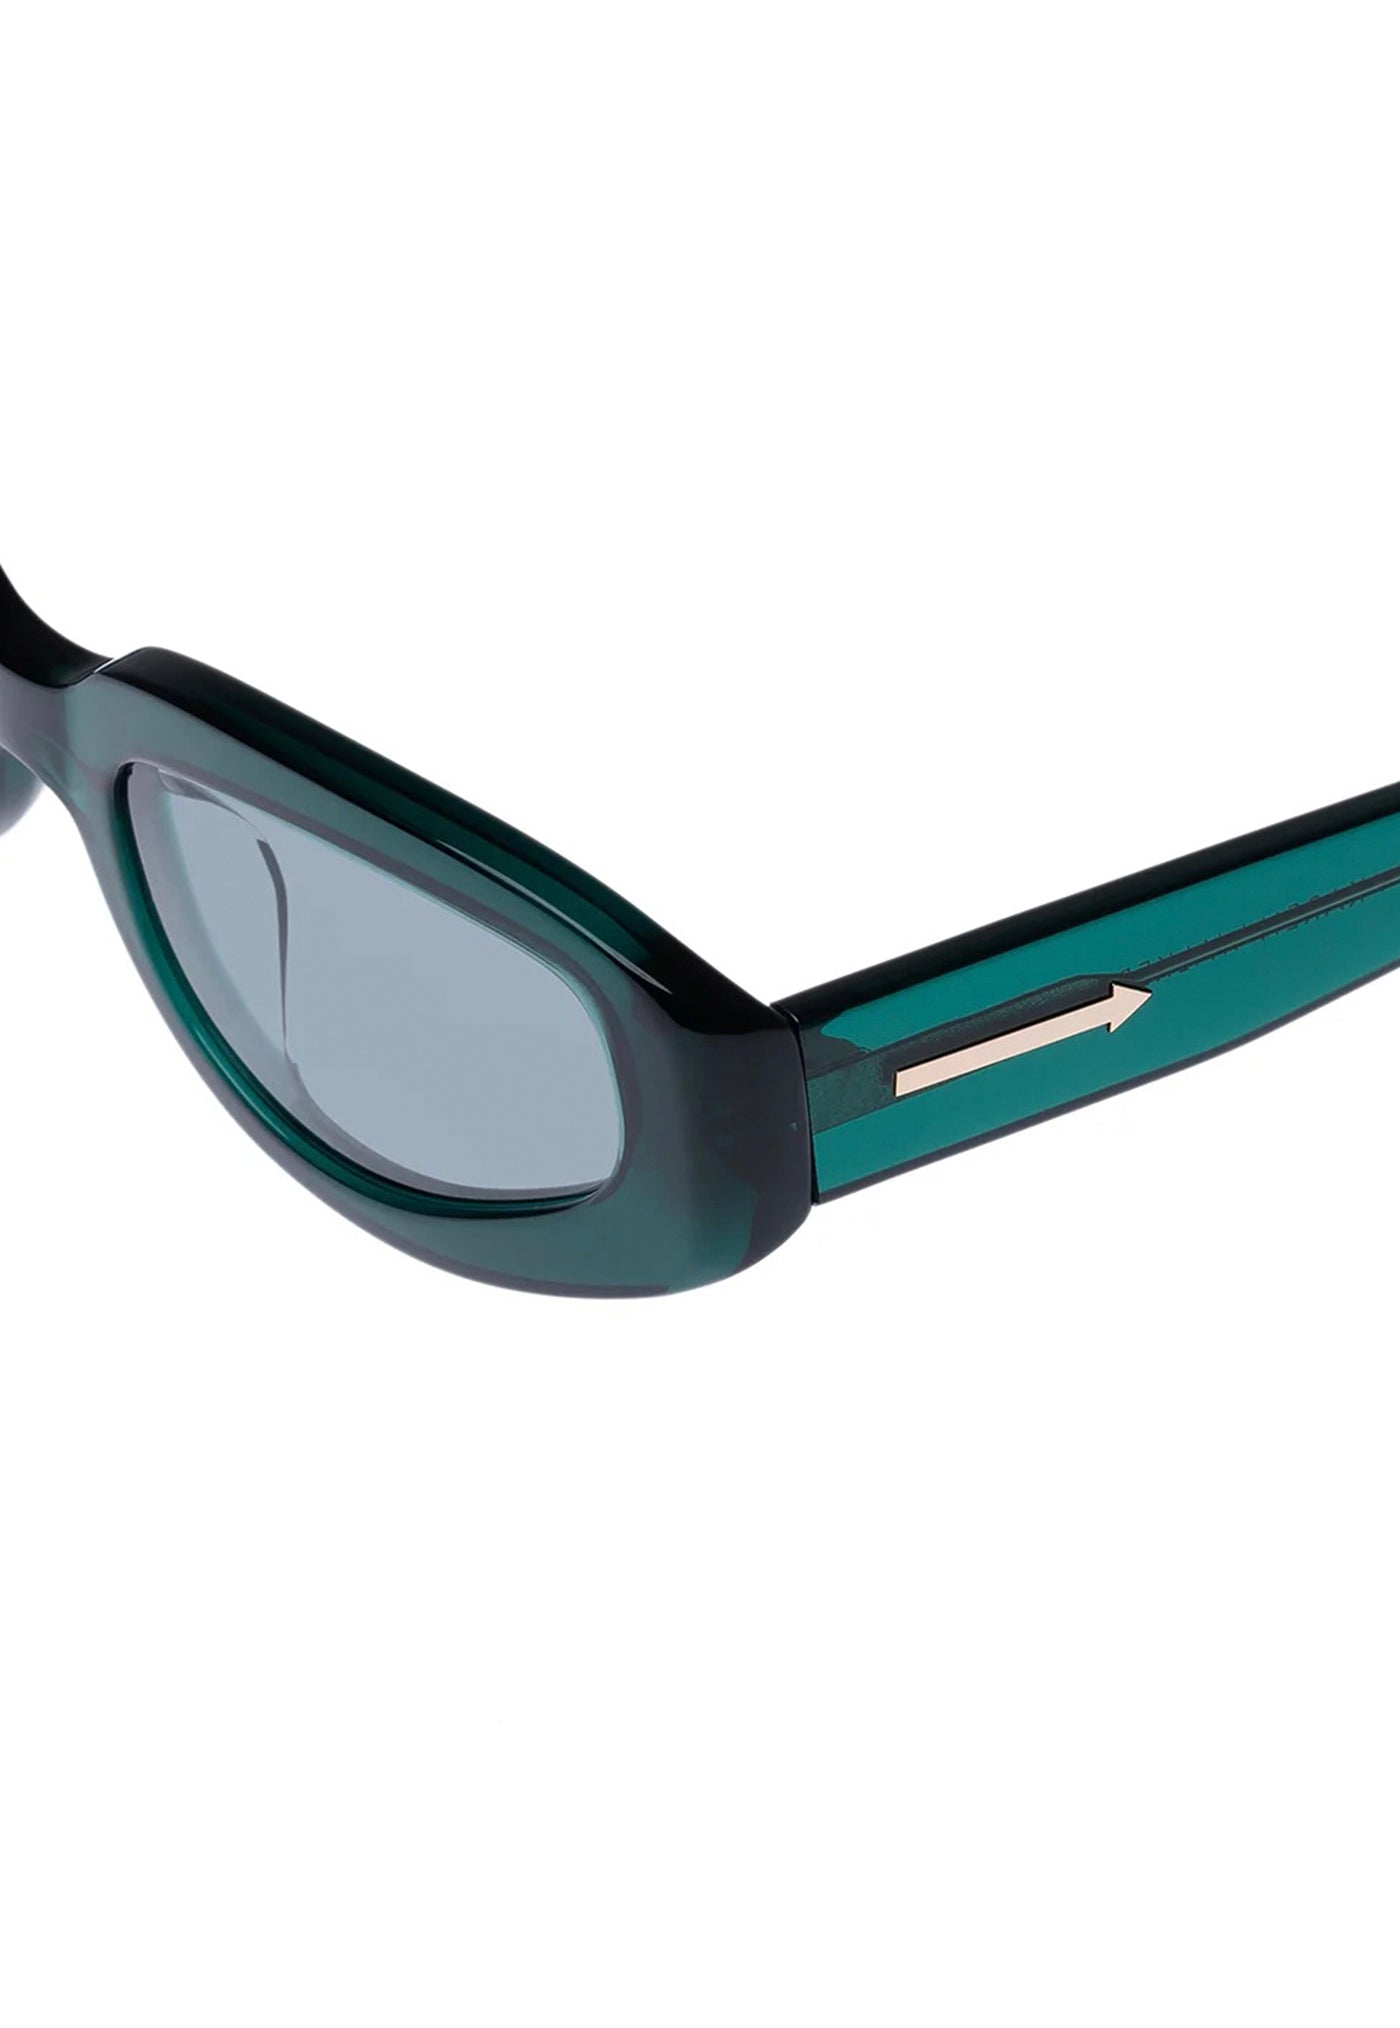 Rally Sunglasses - Emerald sold by Angel Divine